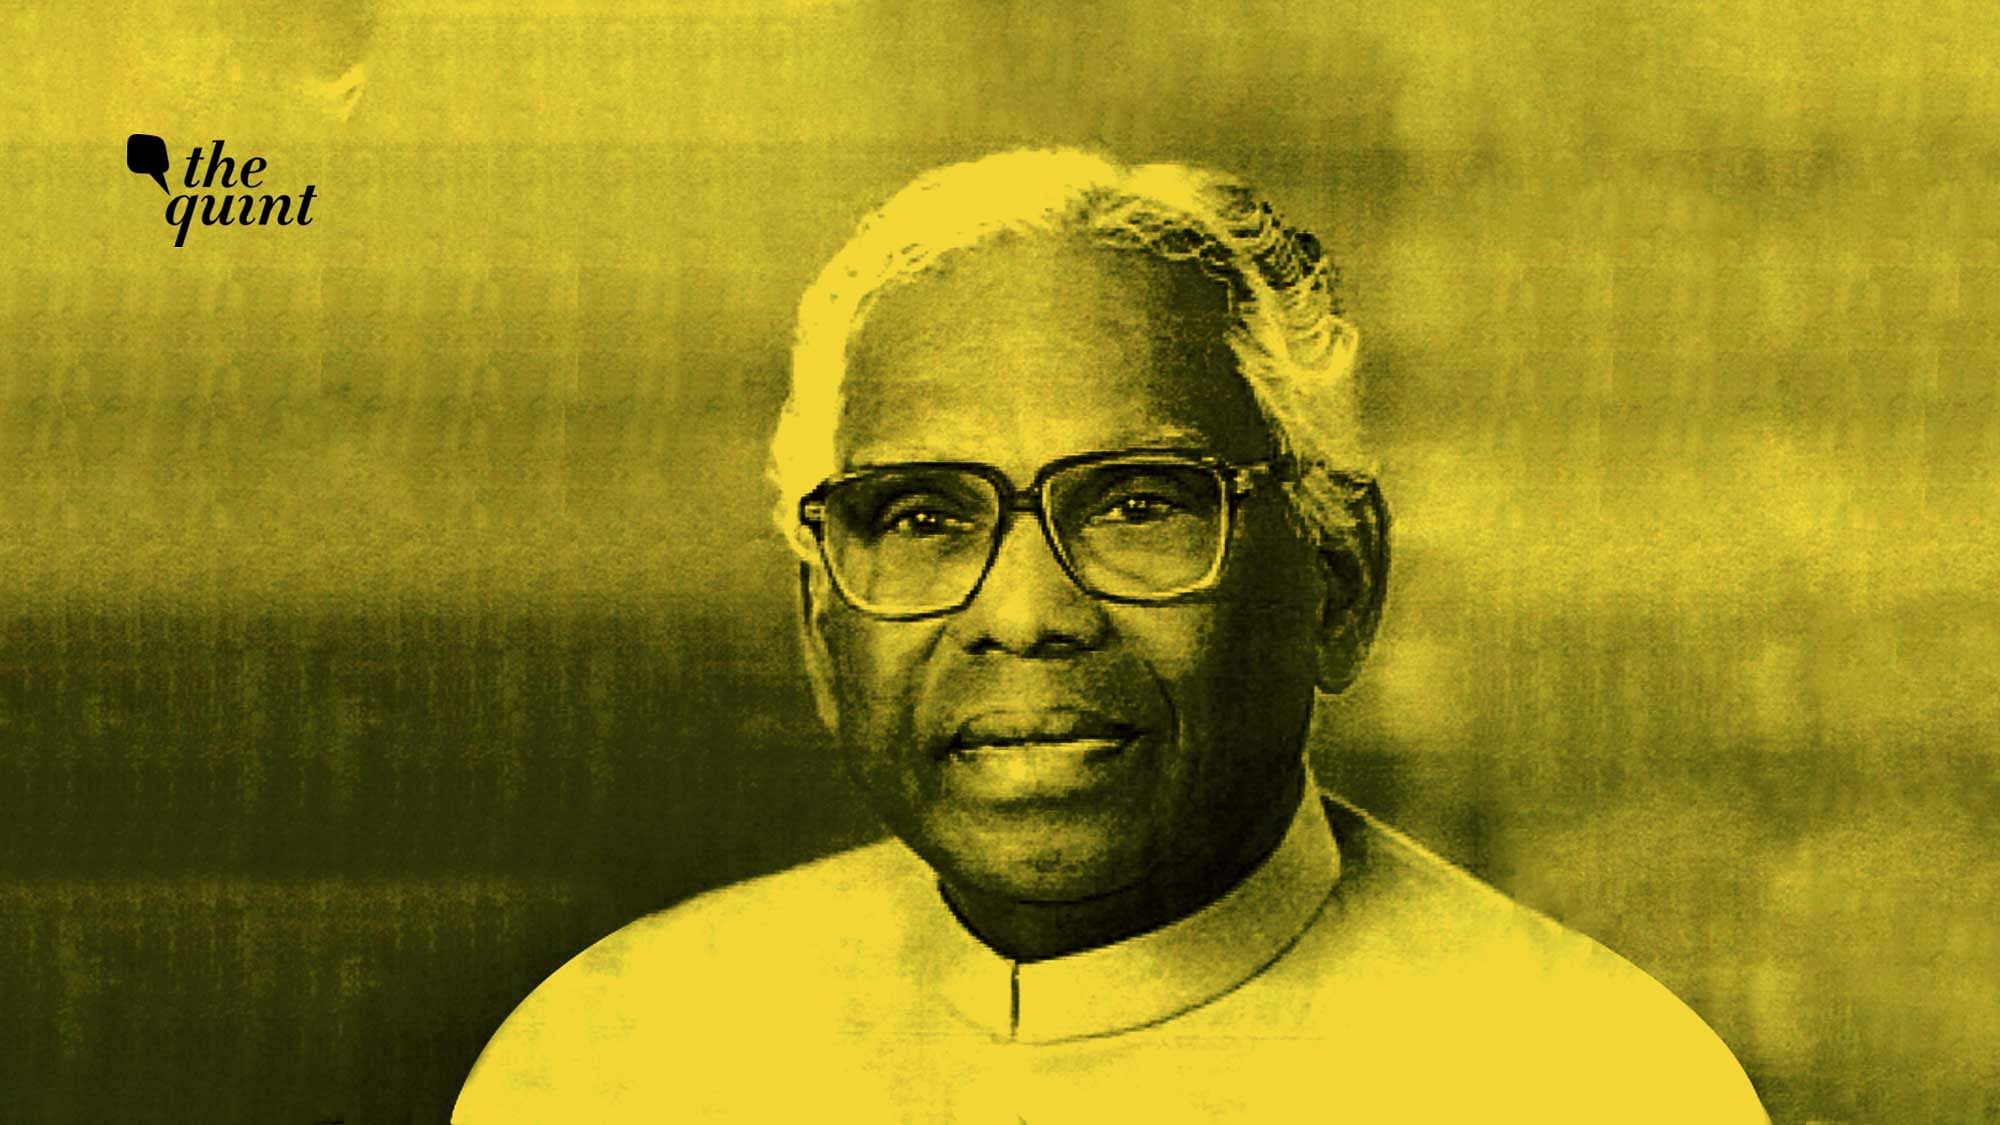 Rarely did all such distinction come wrapped in one person, but it did in the case of President KR Narayanan.